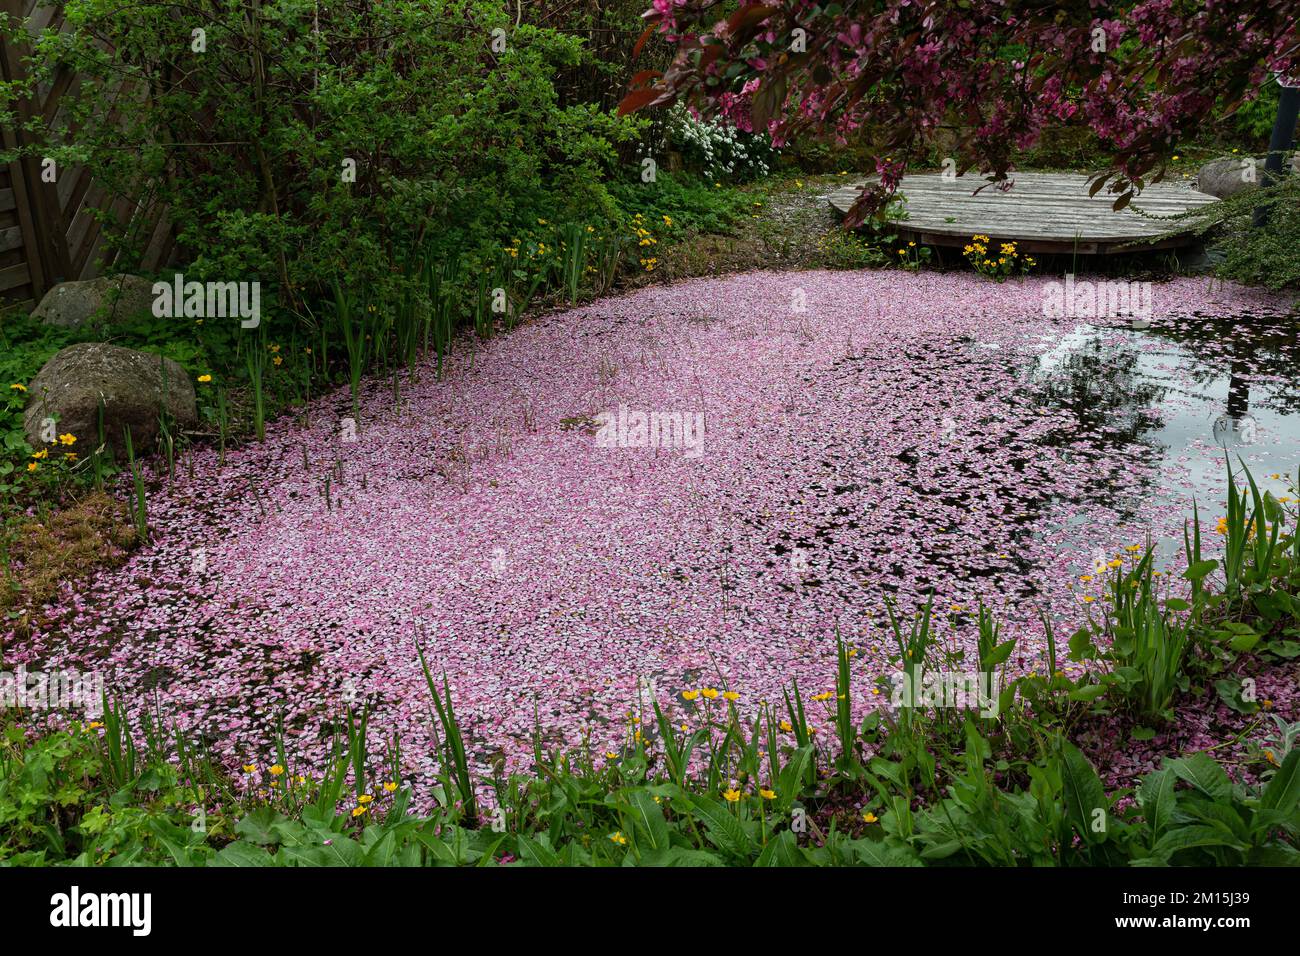 A carpet of pink petals floats on the water of a garden pond. Stock Photo